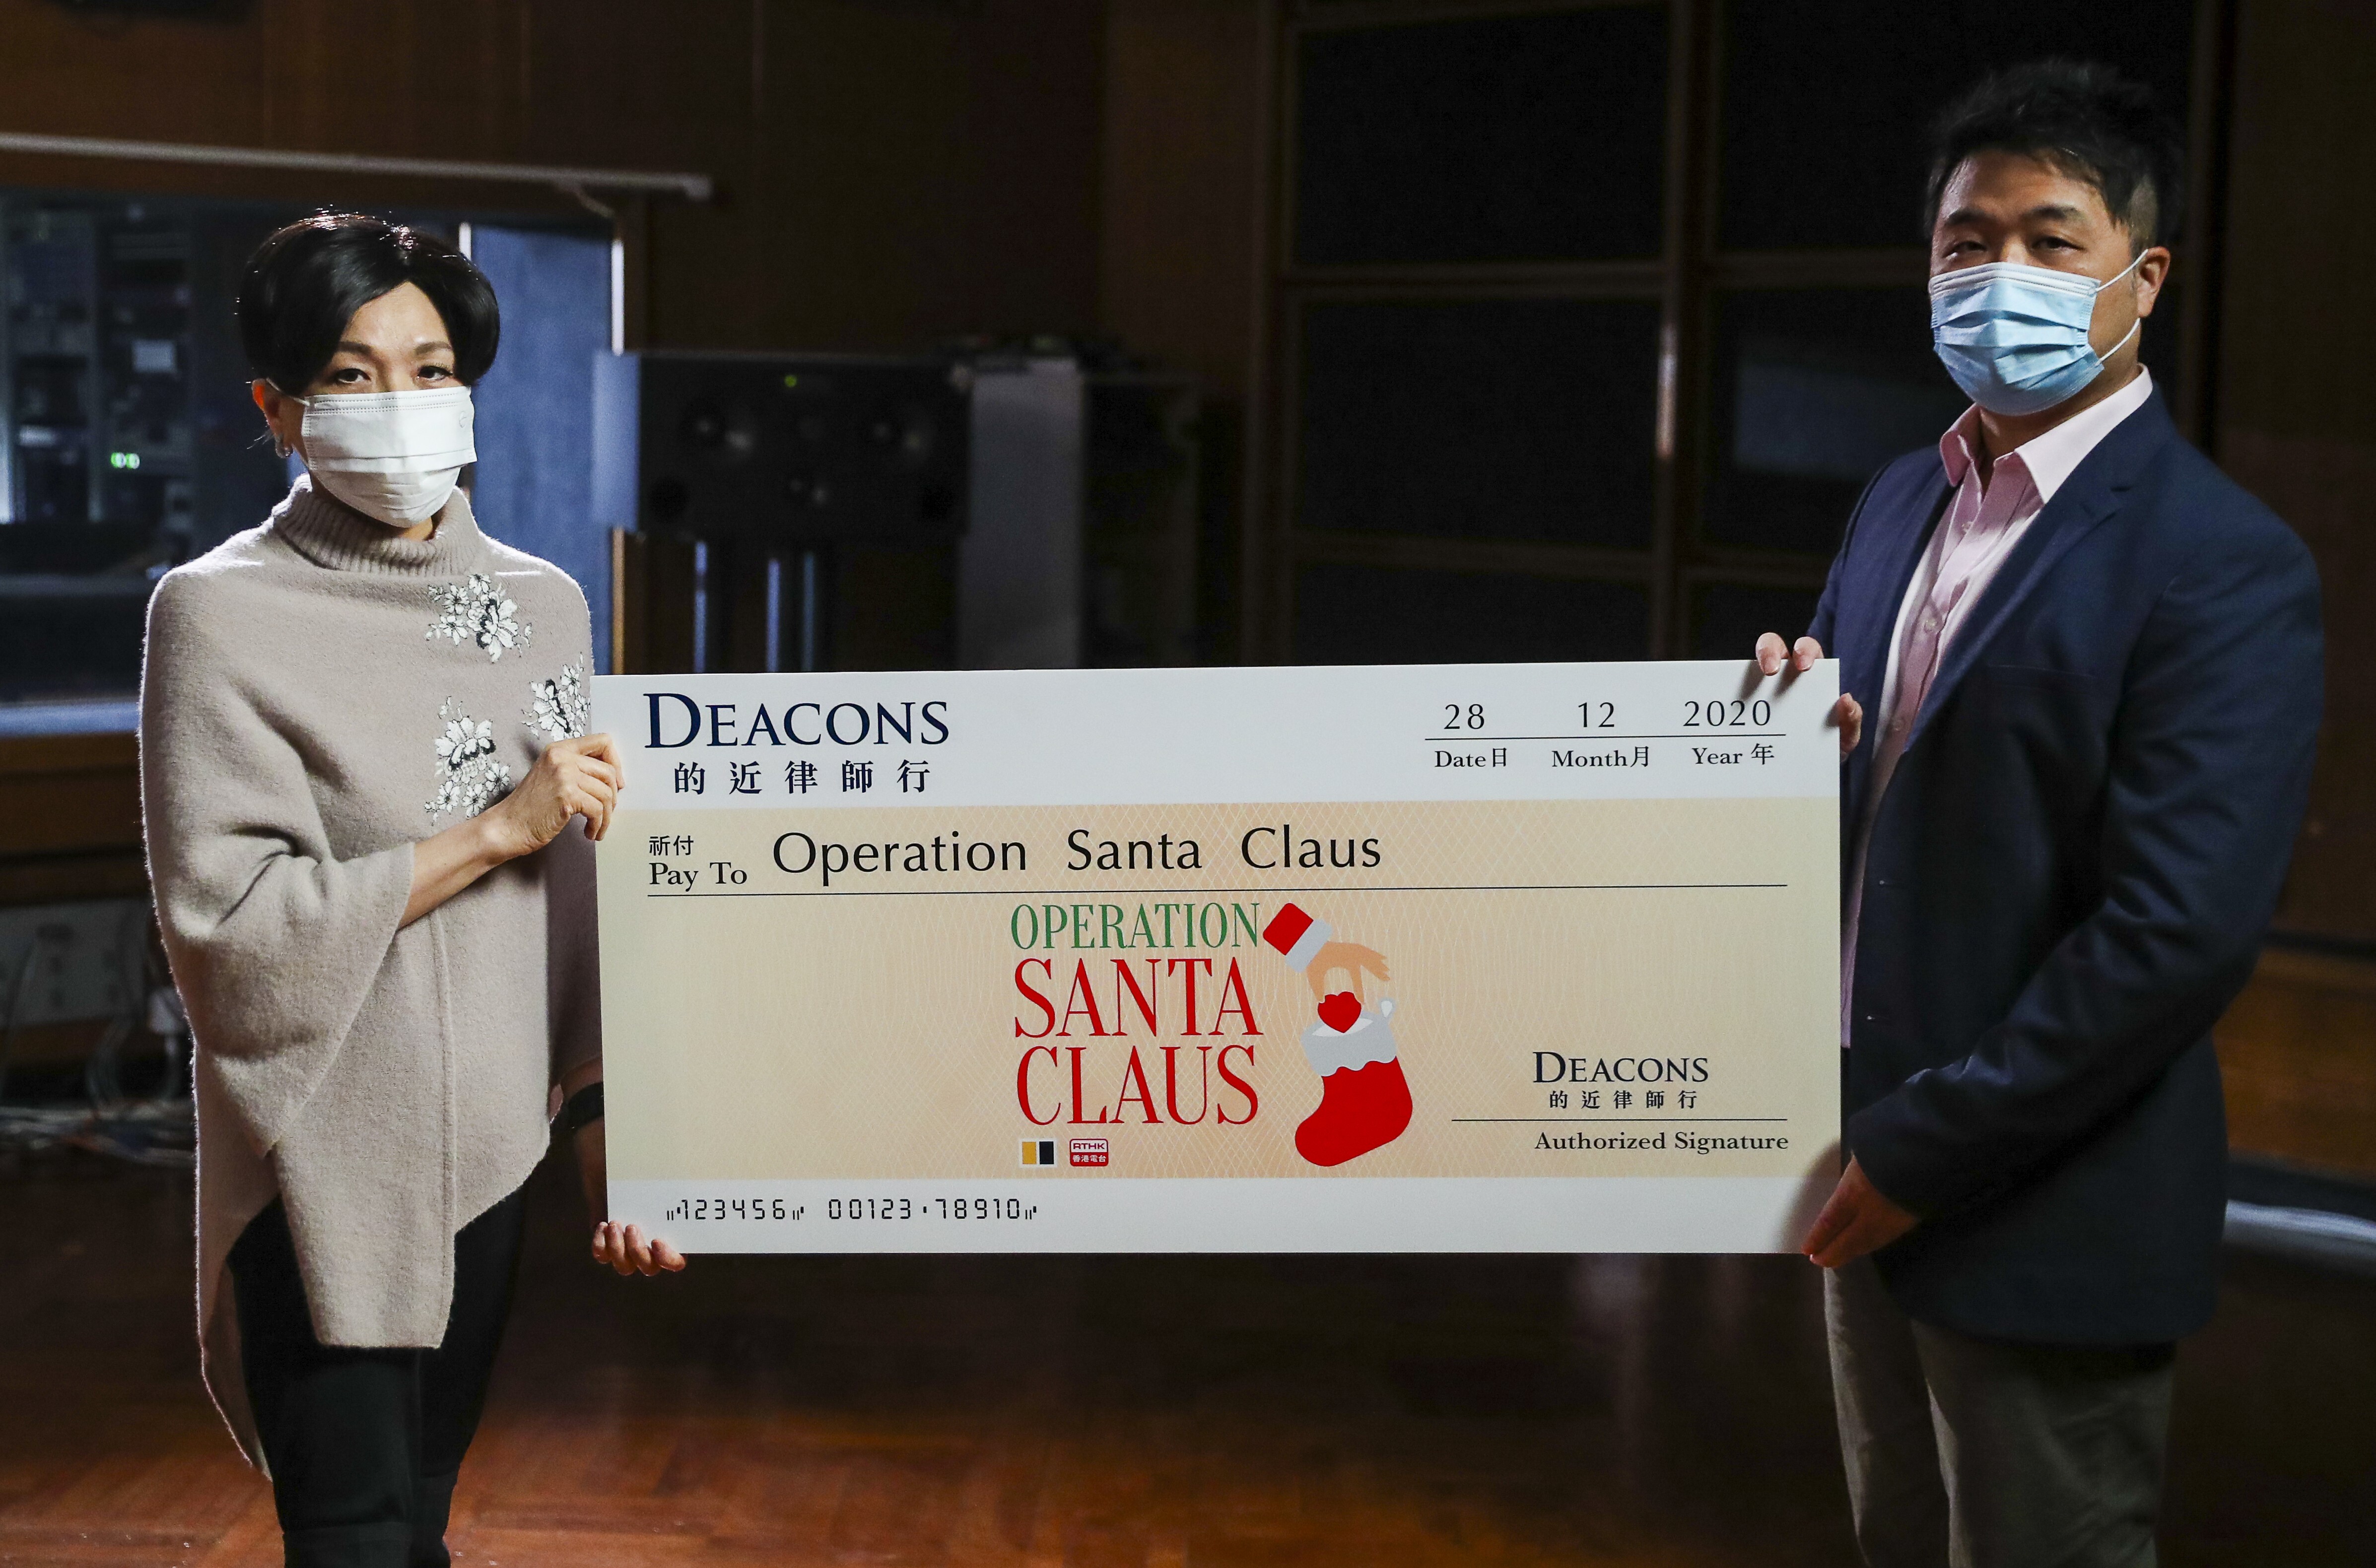 SCMP Charities Ltd project director Lawrence Wong (right) receives a cheque from DEACONS official Lilian Chiang in Kowloon Tong. Photo: Edmond So